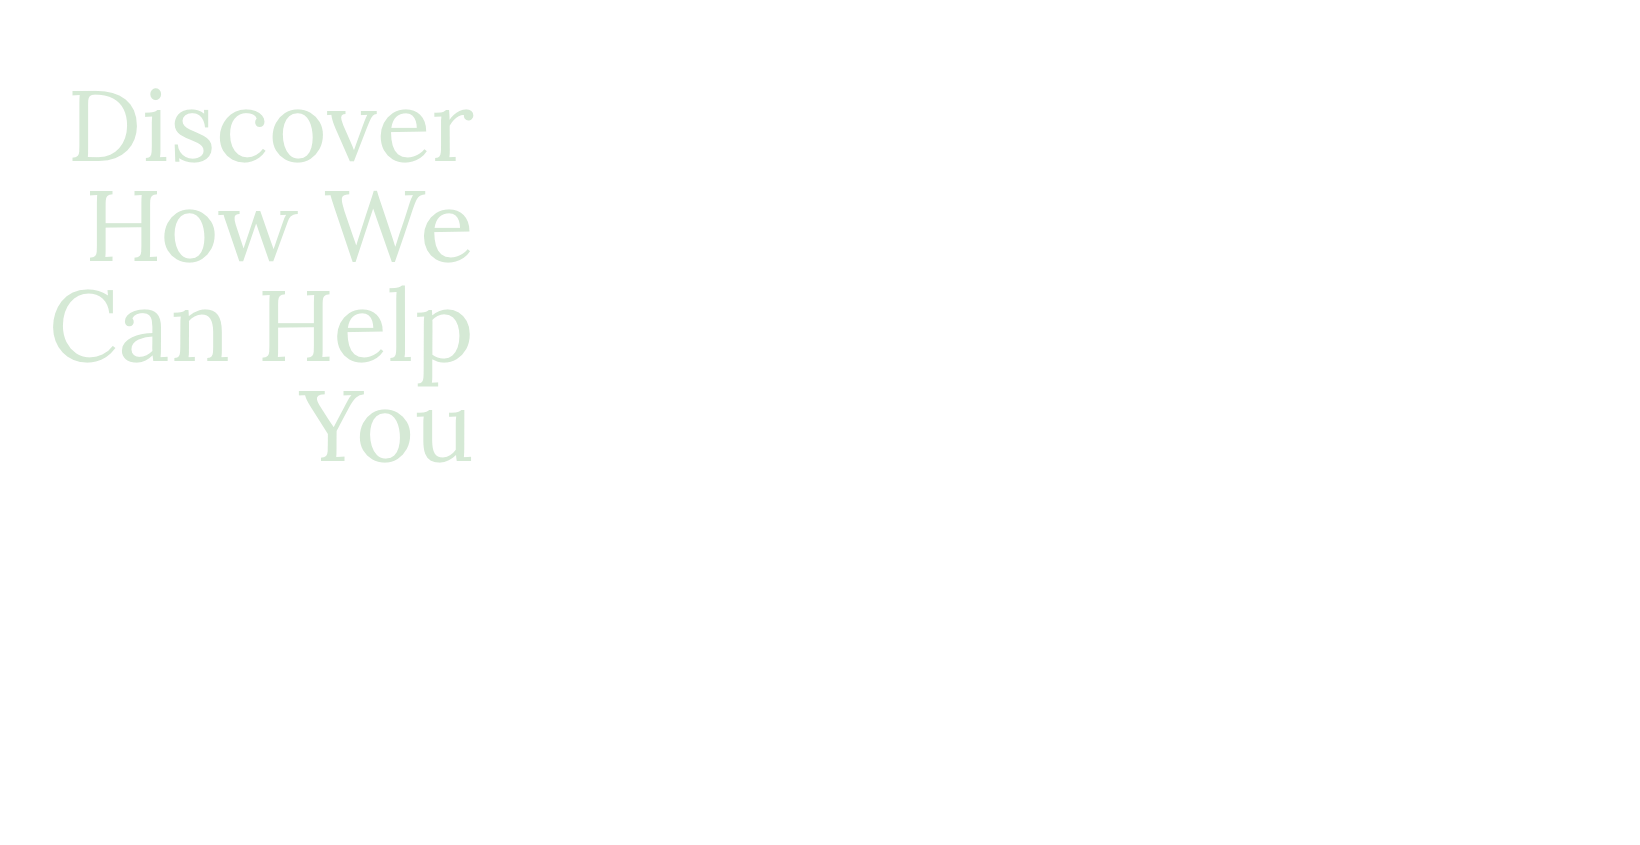 Discover How We Can Help You. Brew Better Brands!